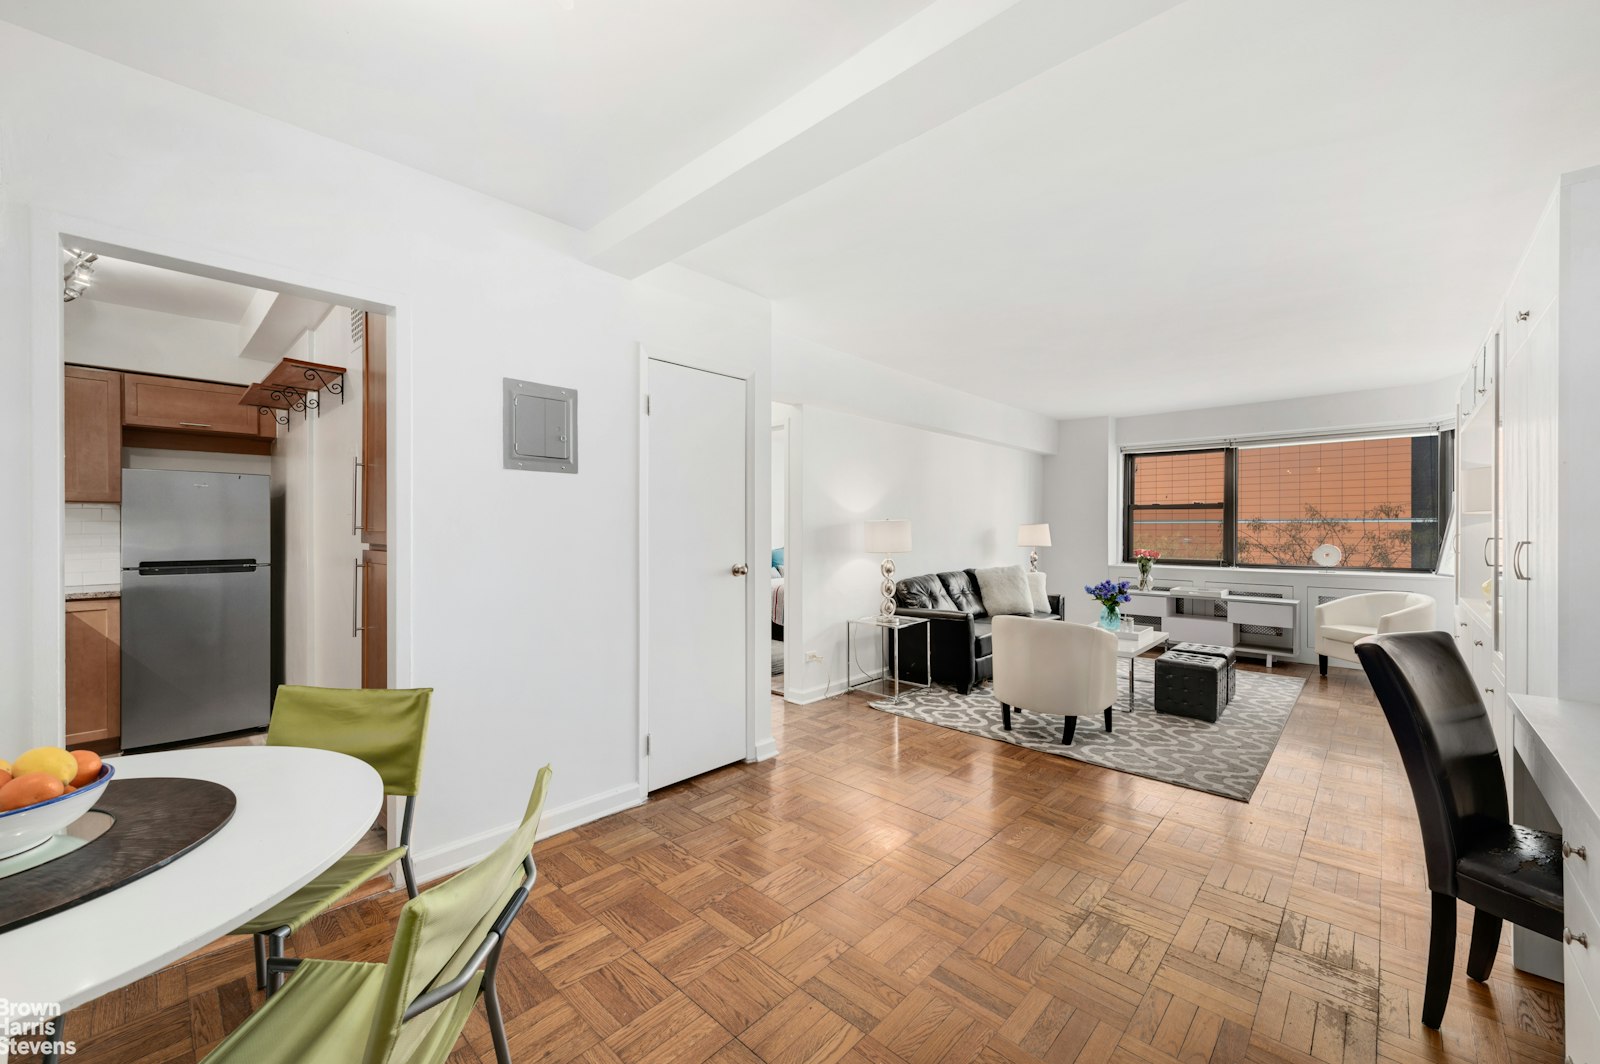 305 East 72nd Street 3Fs, Lenox Hill, Upper East Side, NYC - 1 Bedrooms  
1 Bathrooms  
3 Rooms - 